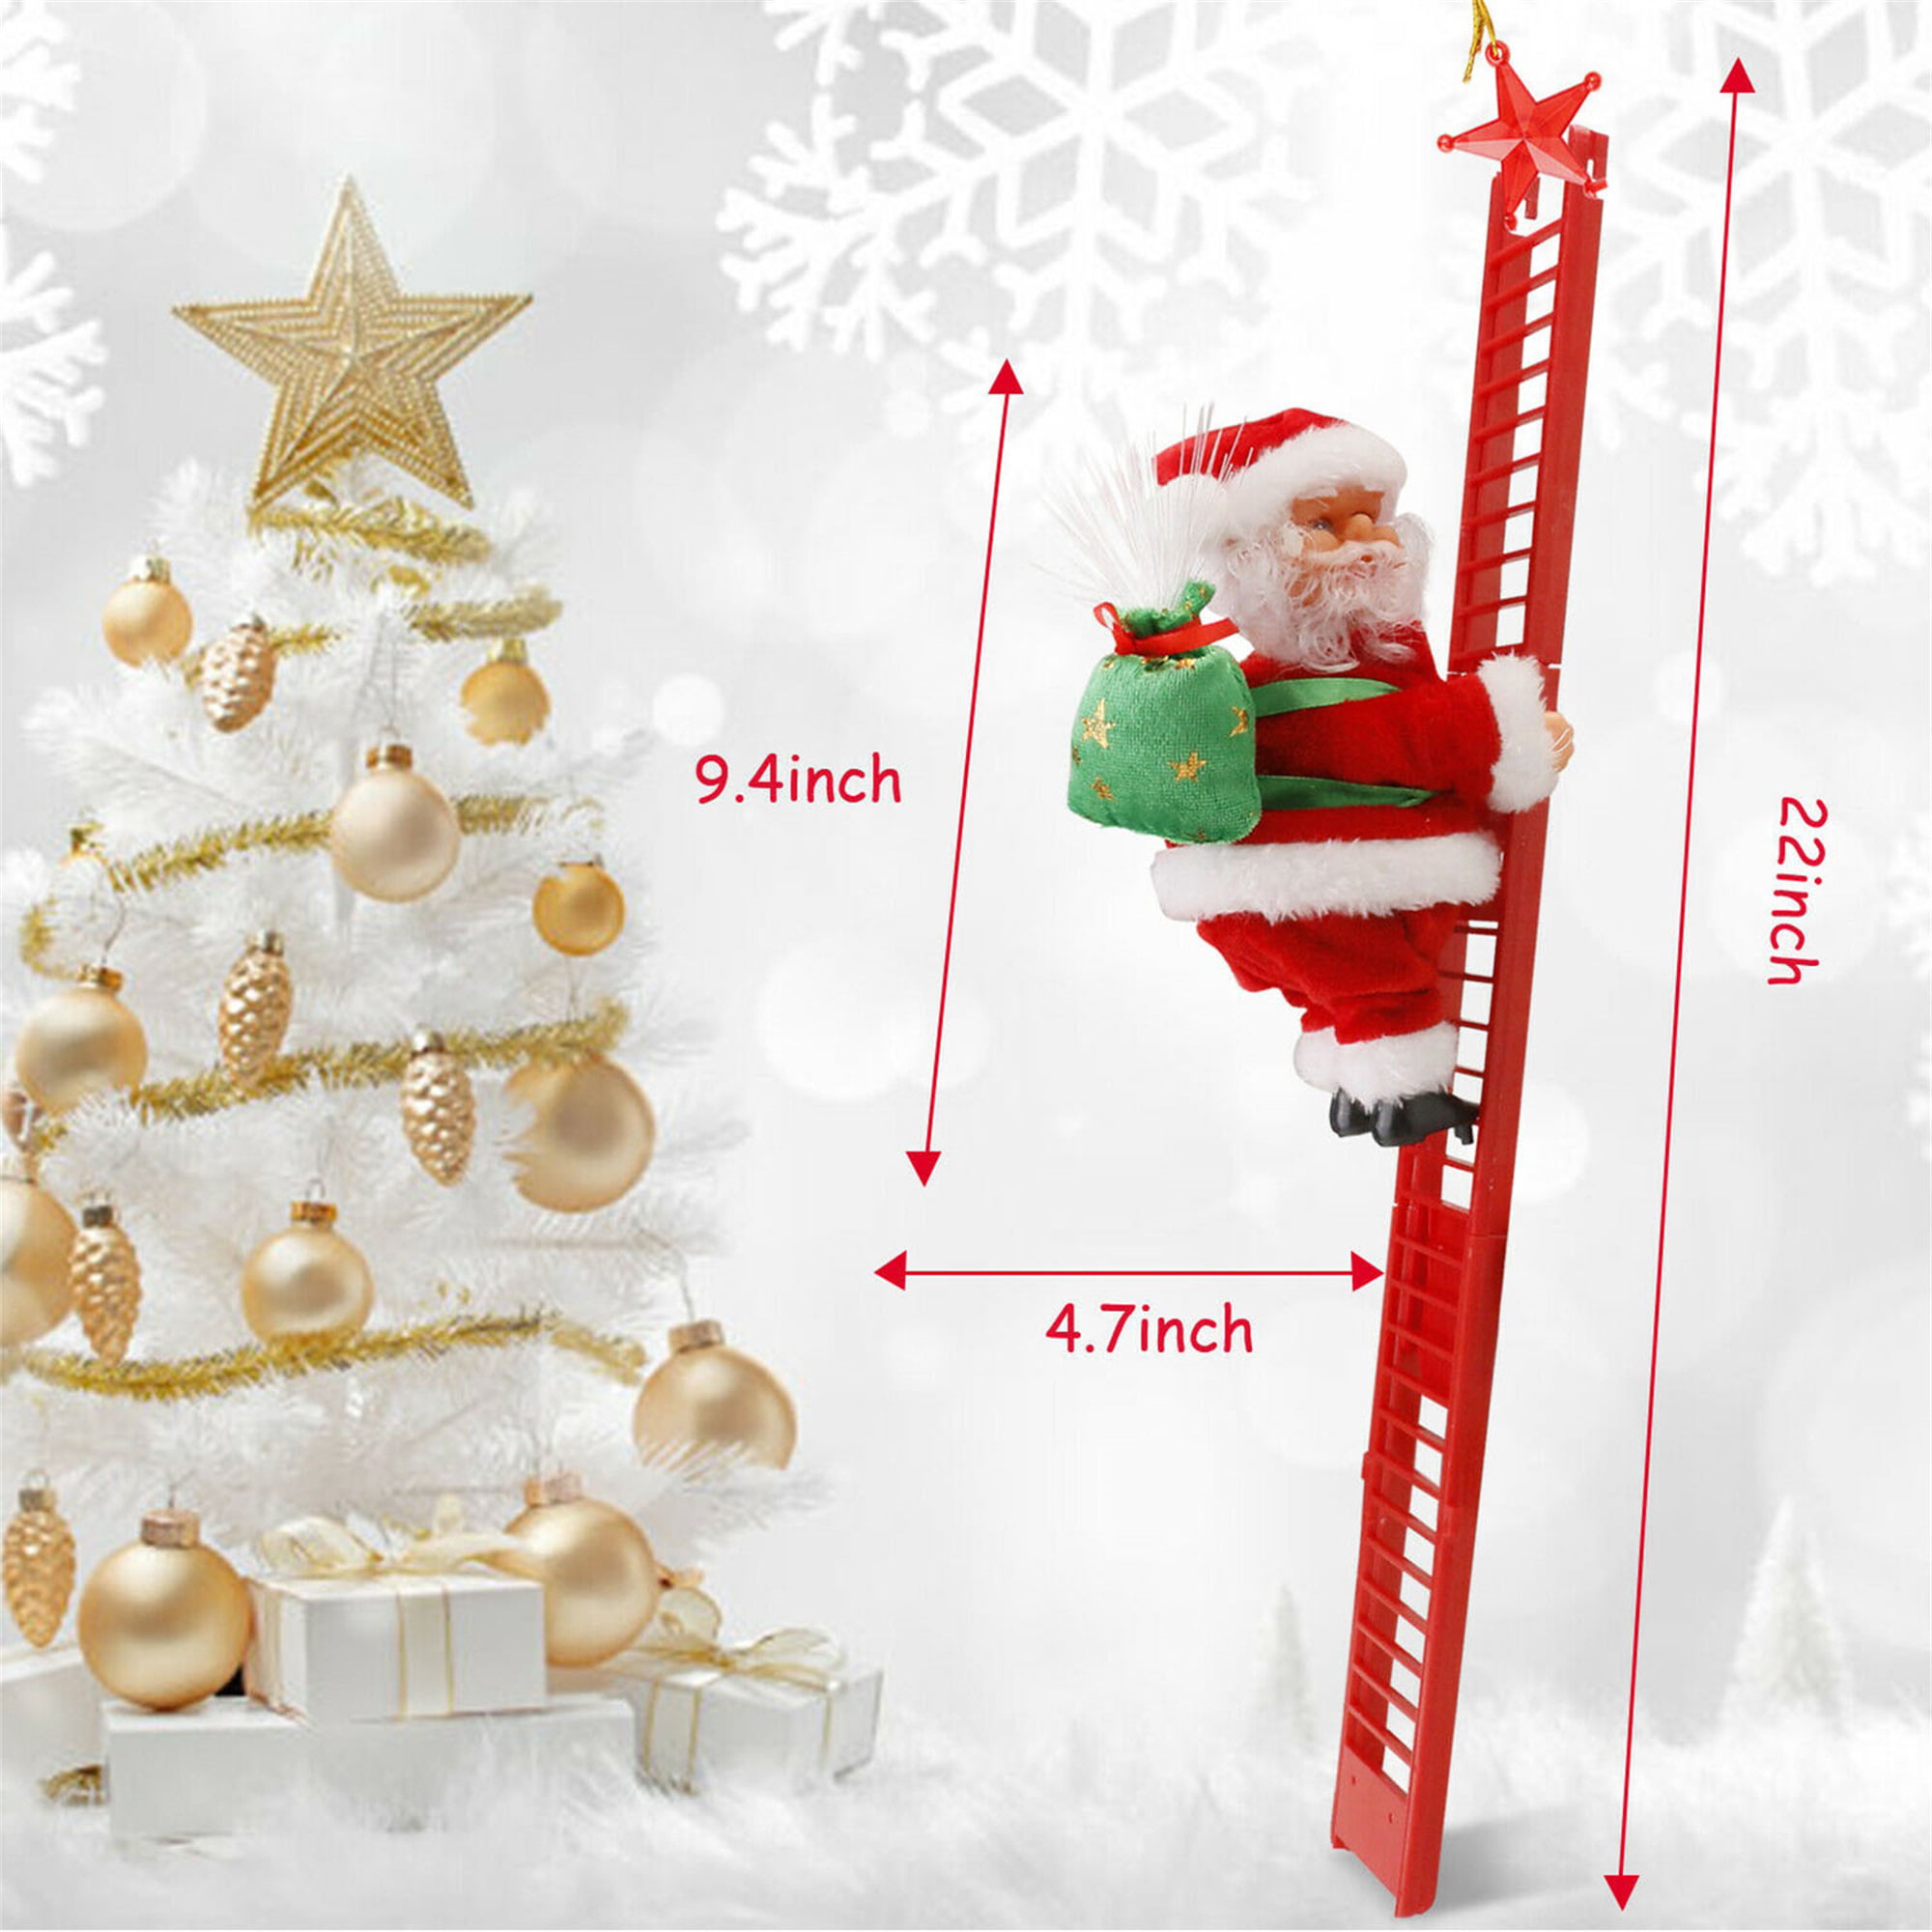 Animated Santa Claus Electric Musical Climbing Ladder Christmas Tree Ornament US 